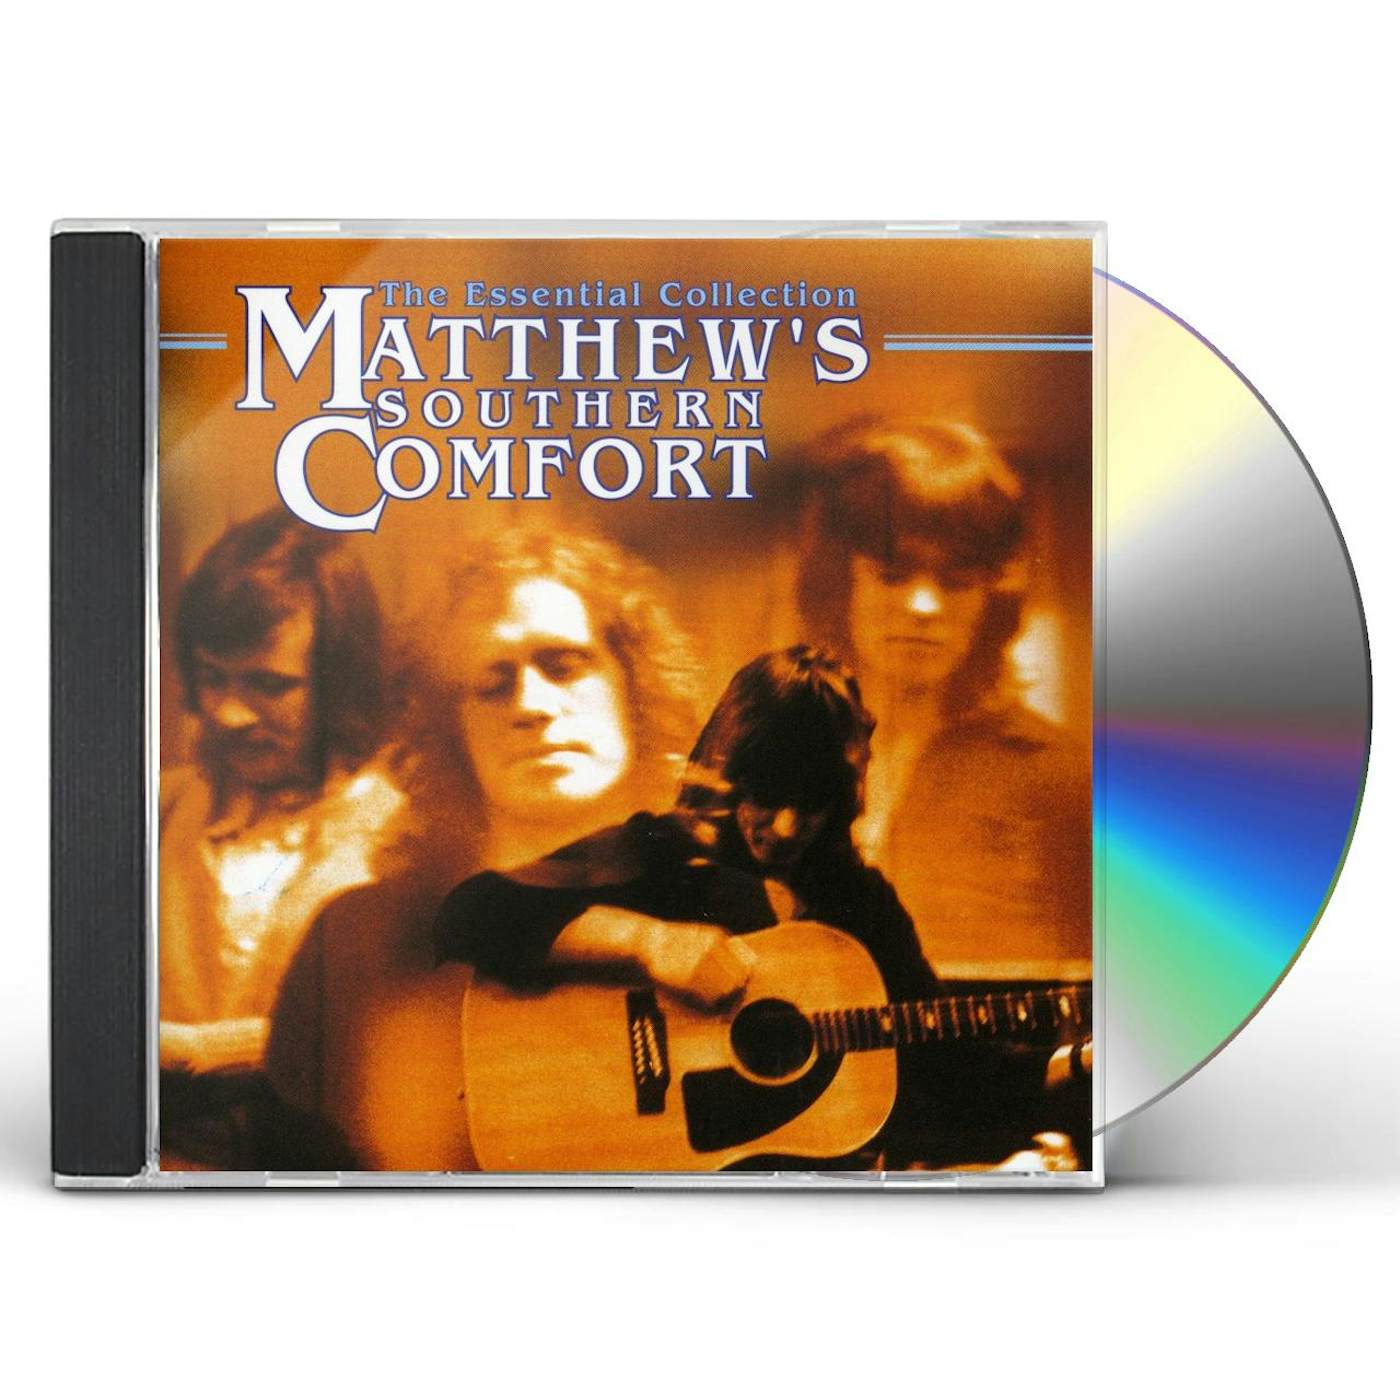 Matthews' Southern Comfort ESSENTIAL COLLECTION CD